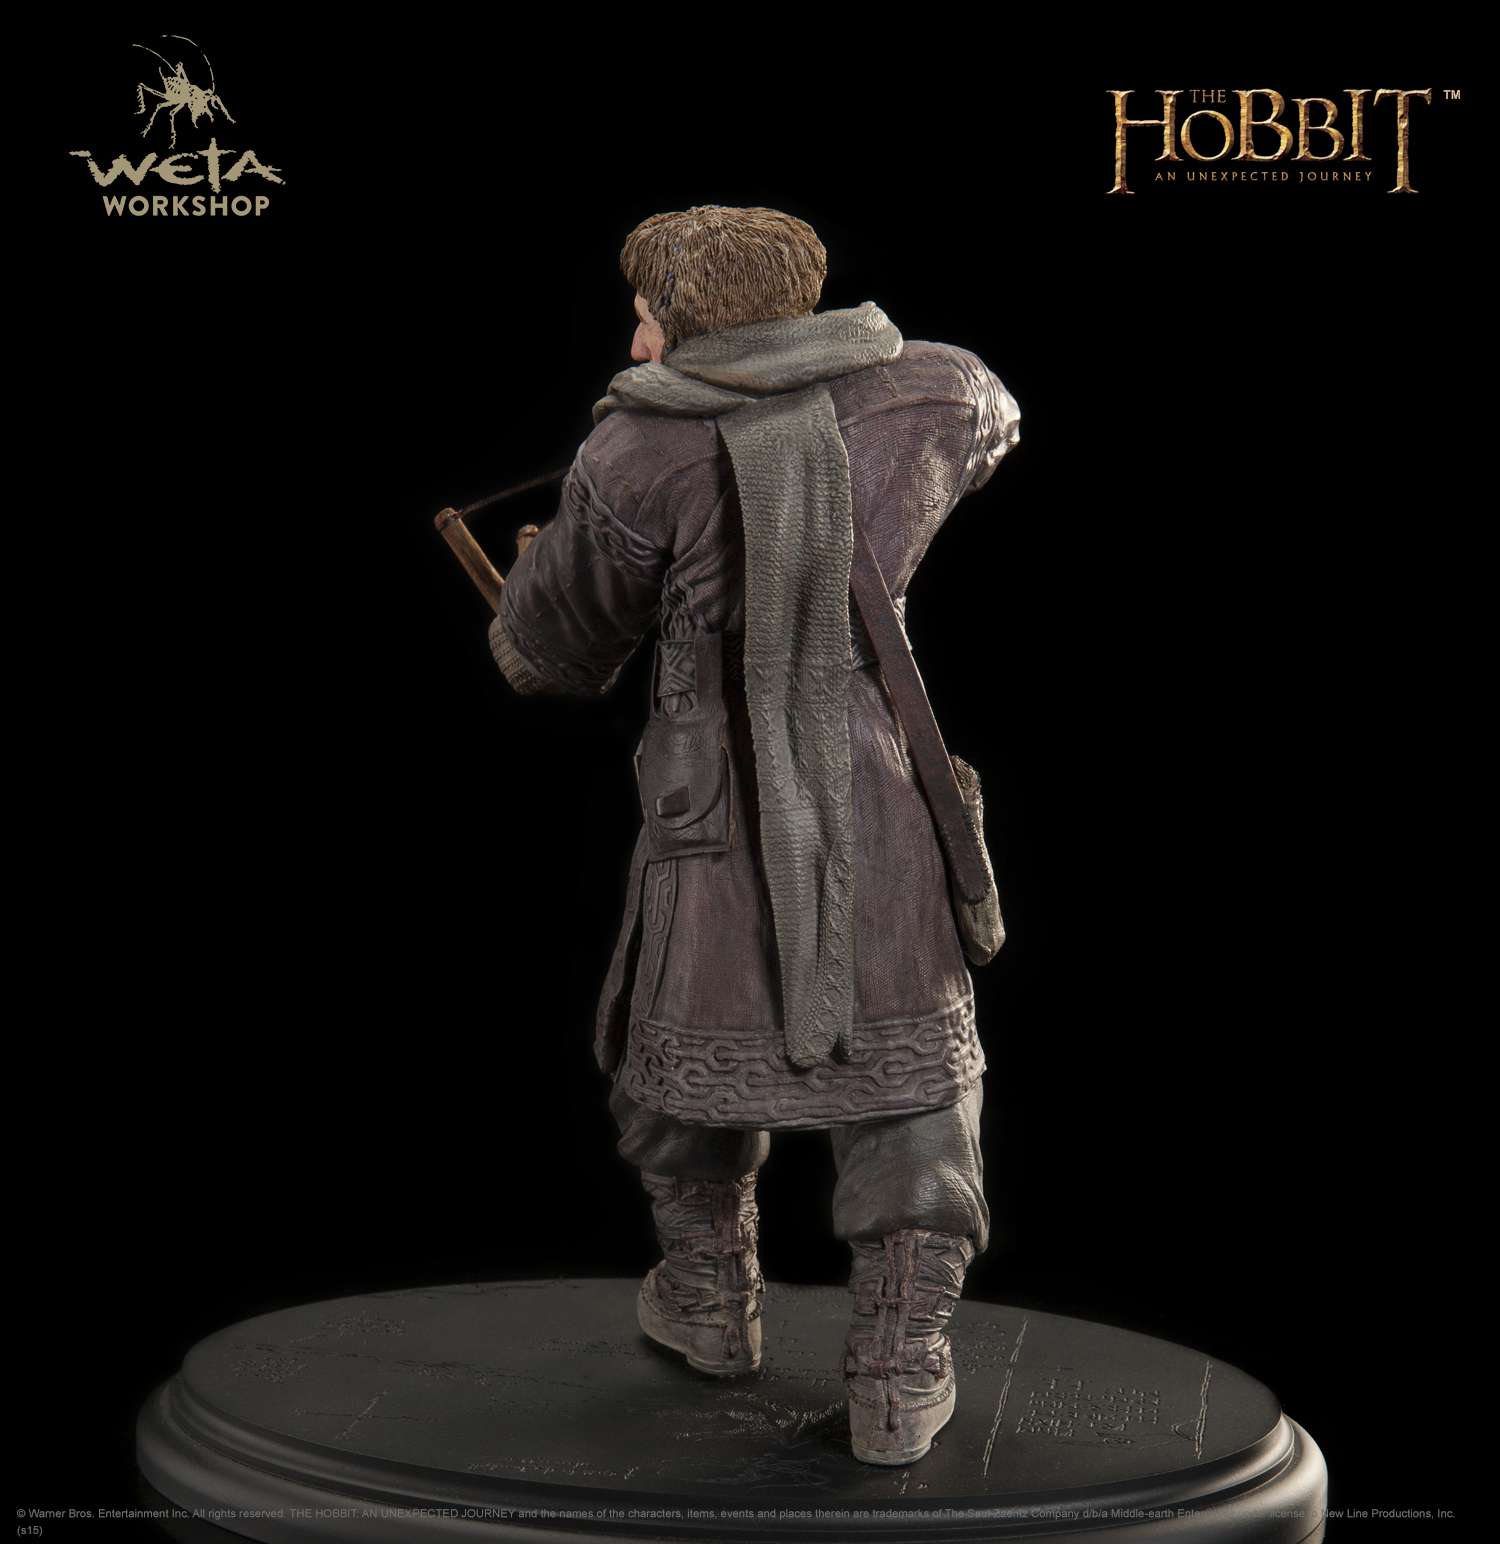 Details about   Hobbit Durin's Day Pin Collectible An Unexpected Journey by Weta Authentic 1.4" 